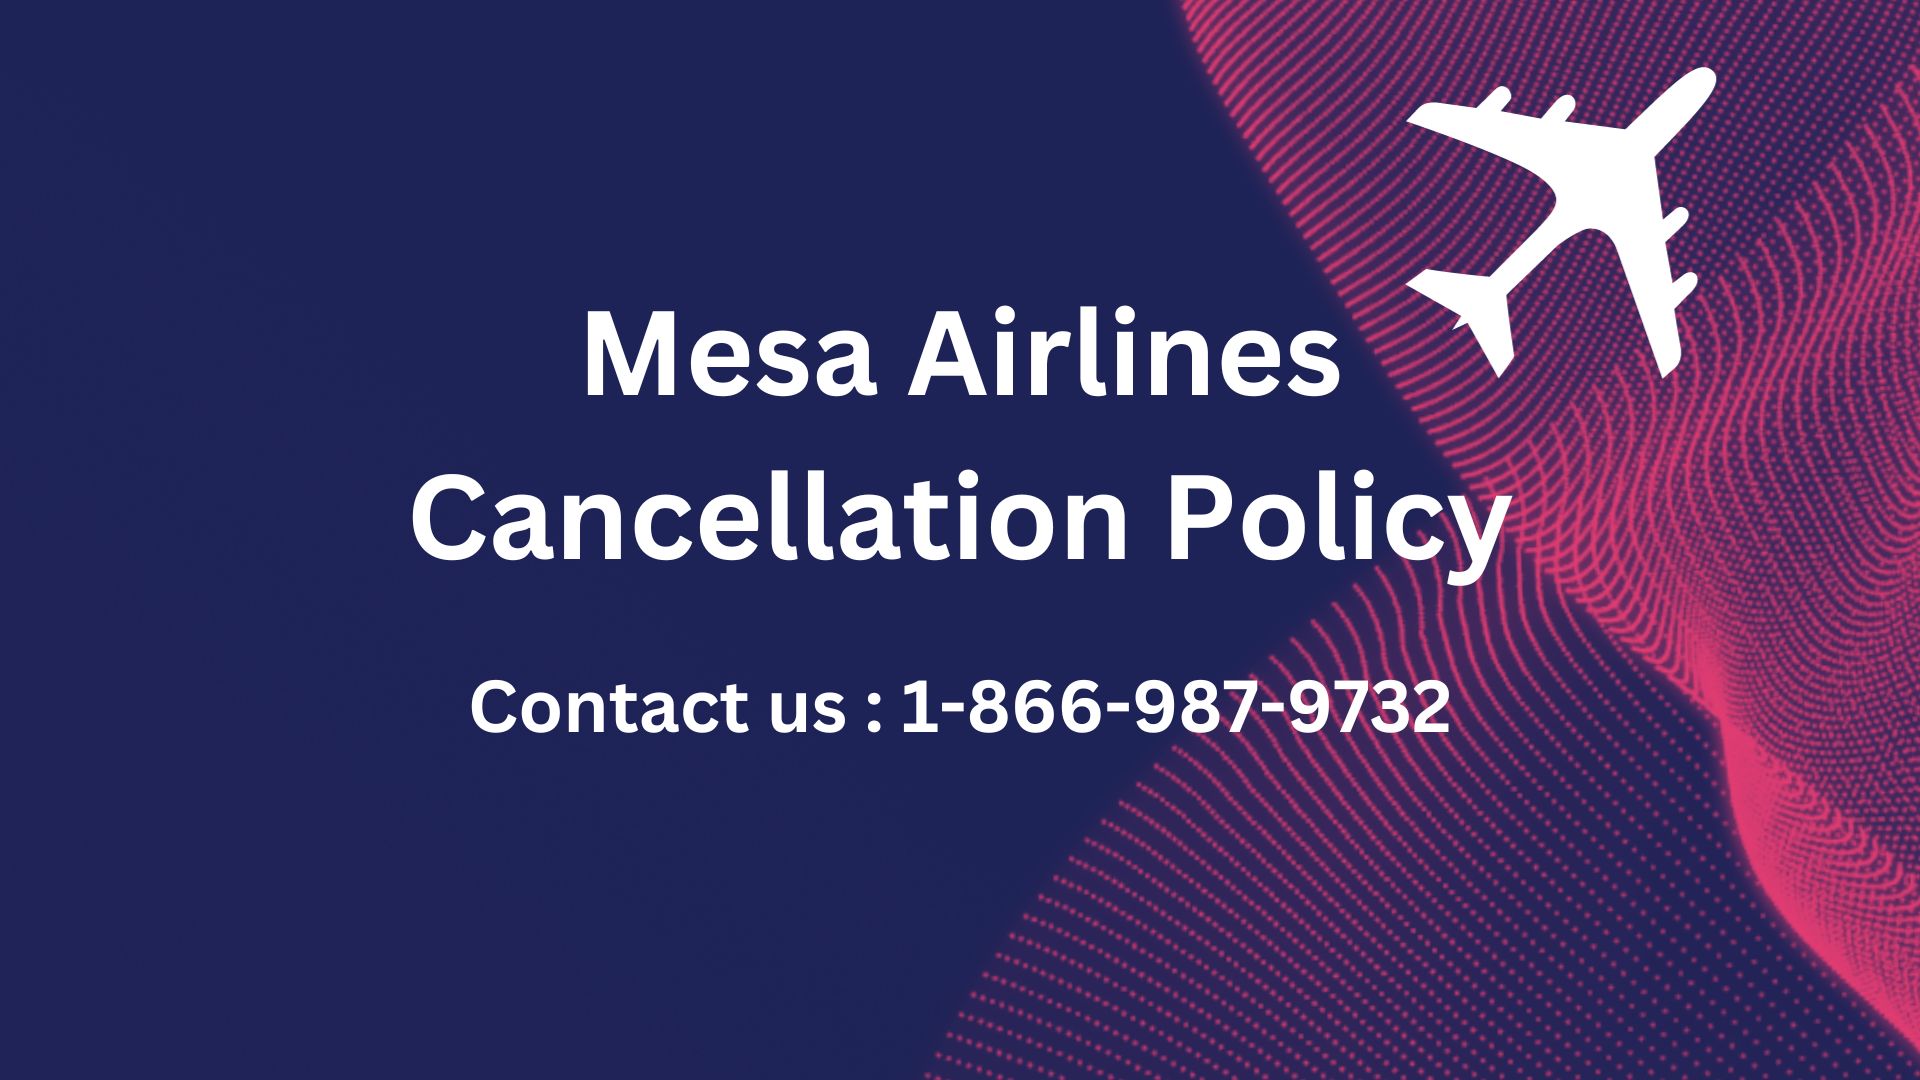 Mesa Airlines Cancellation Policy